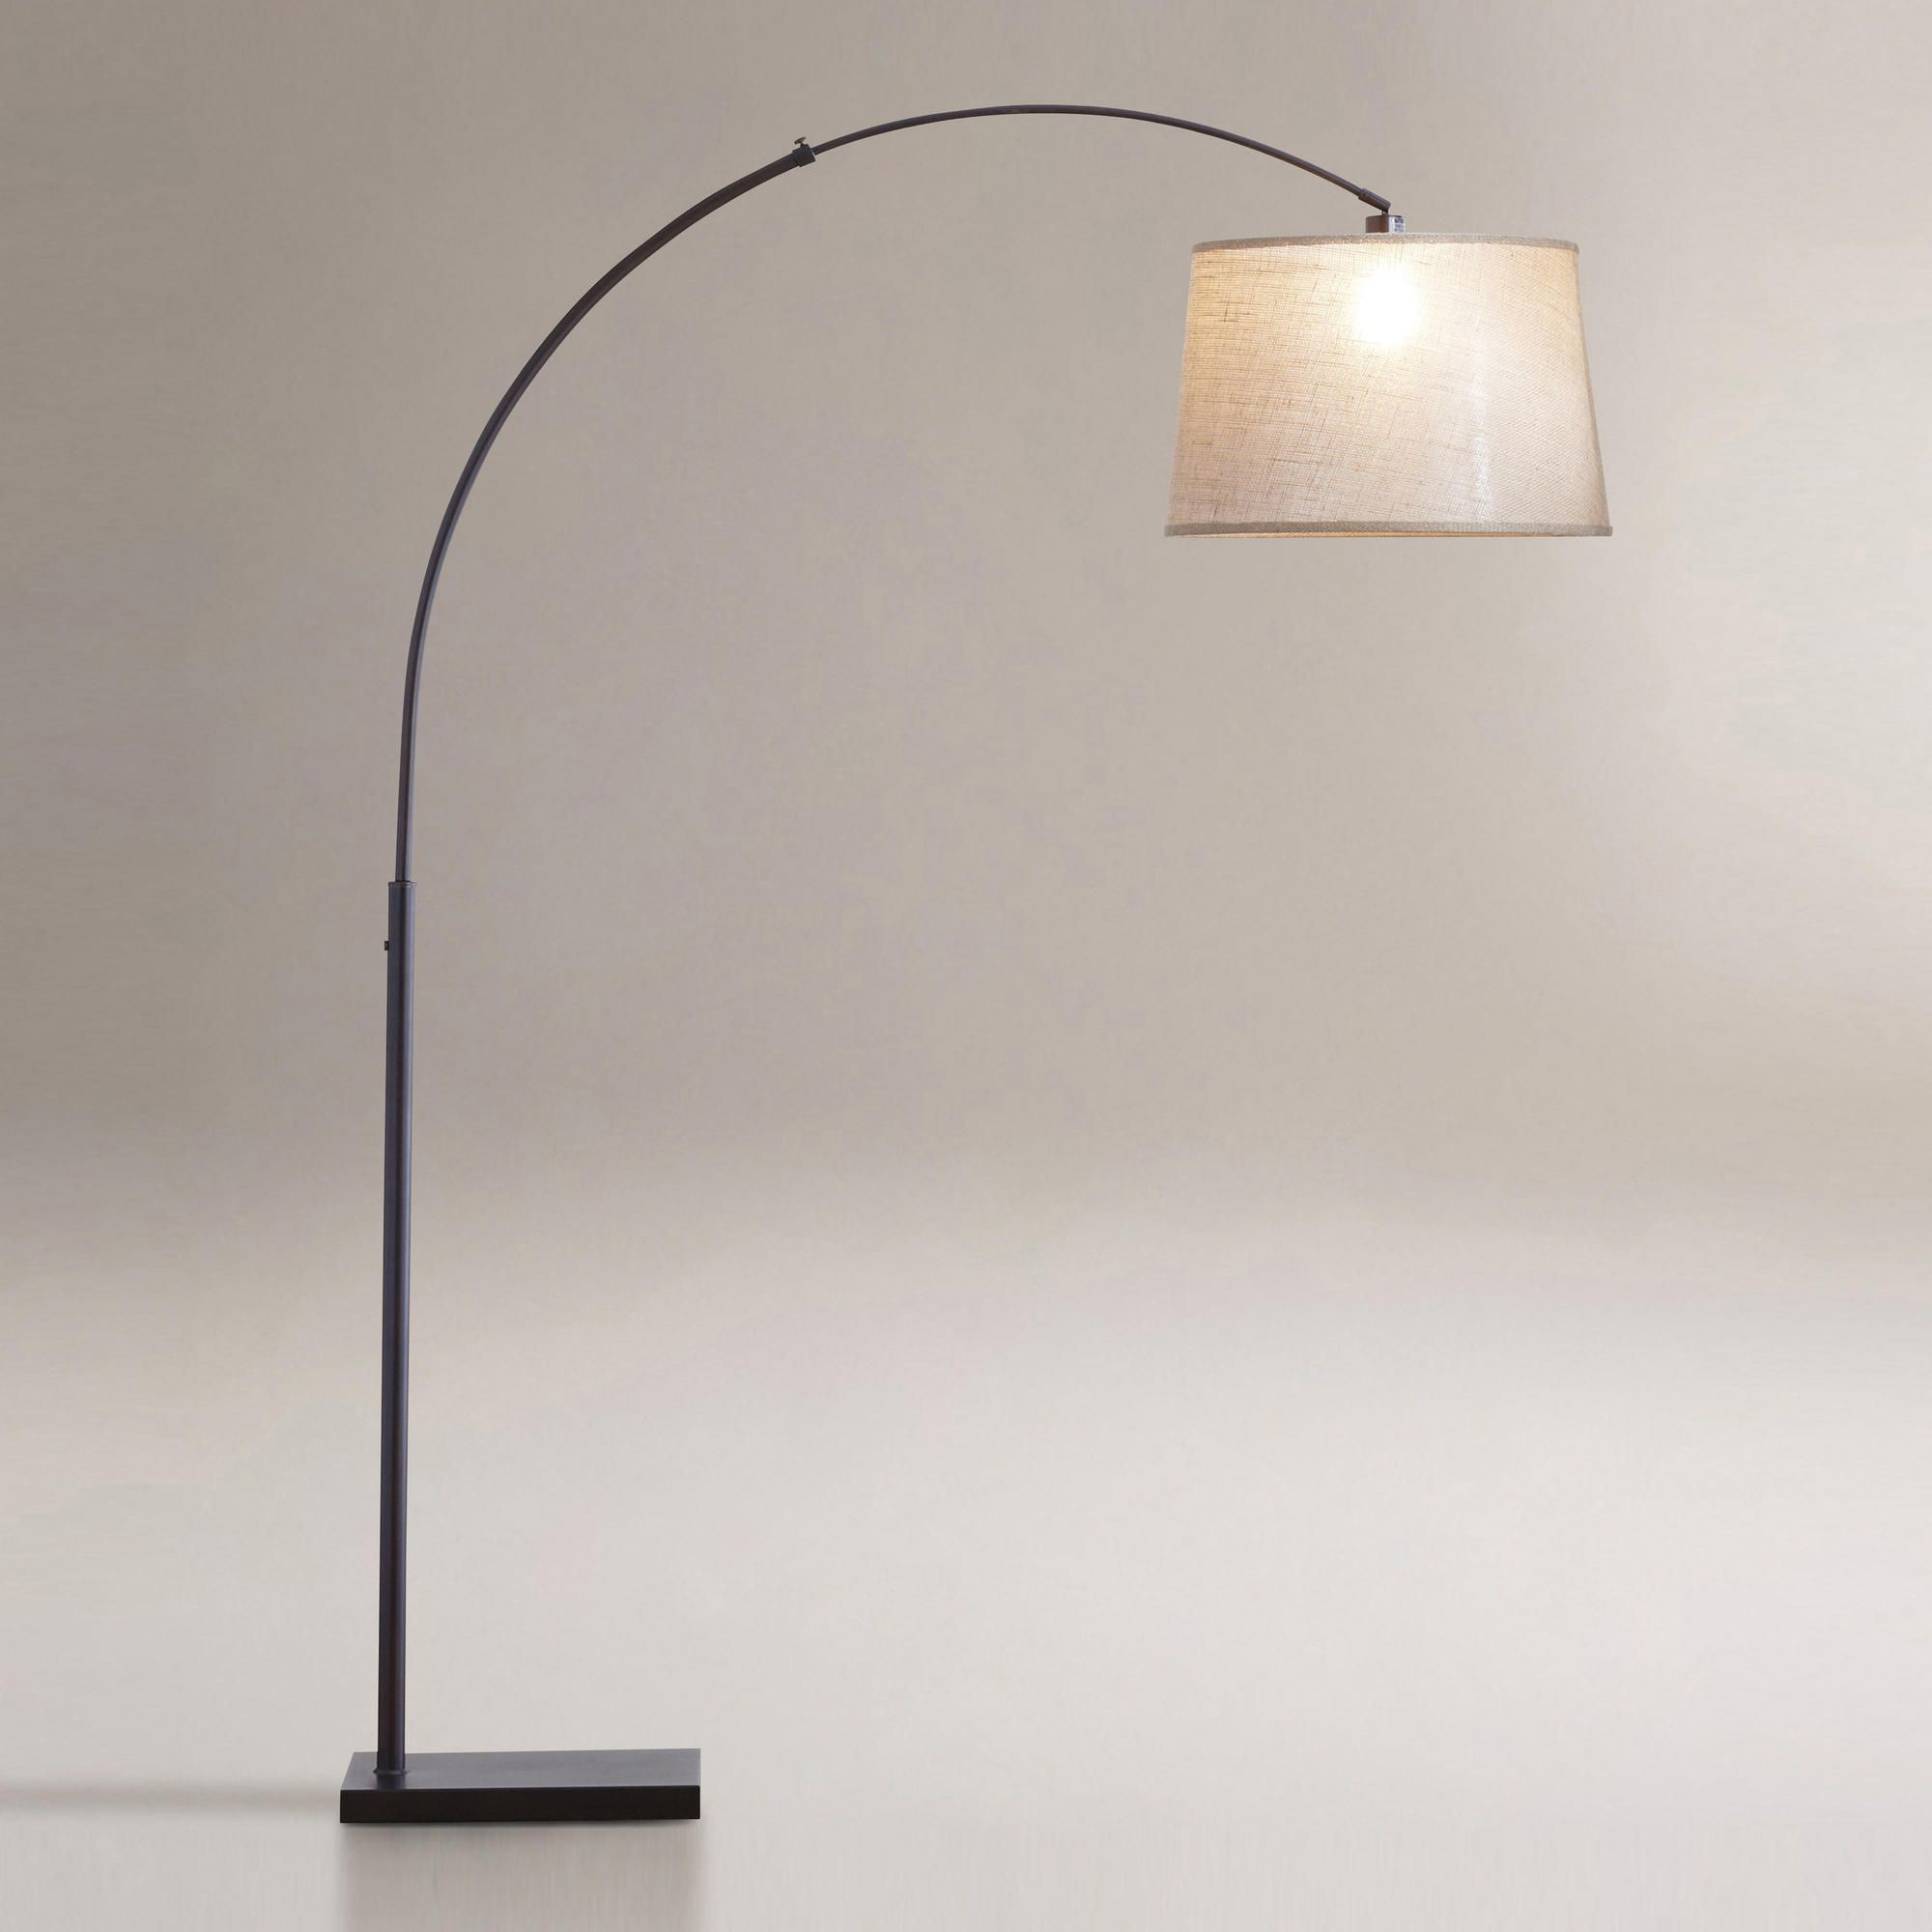 Loden Arc Floor Lamp Base World Market 300 Cheaper Than for dimensions 2000 X 2000